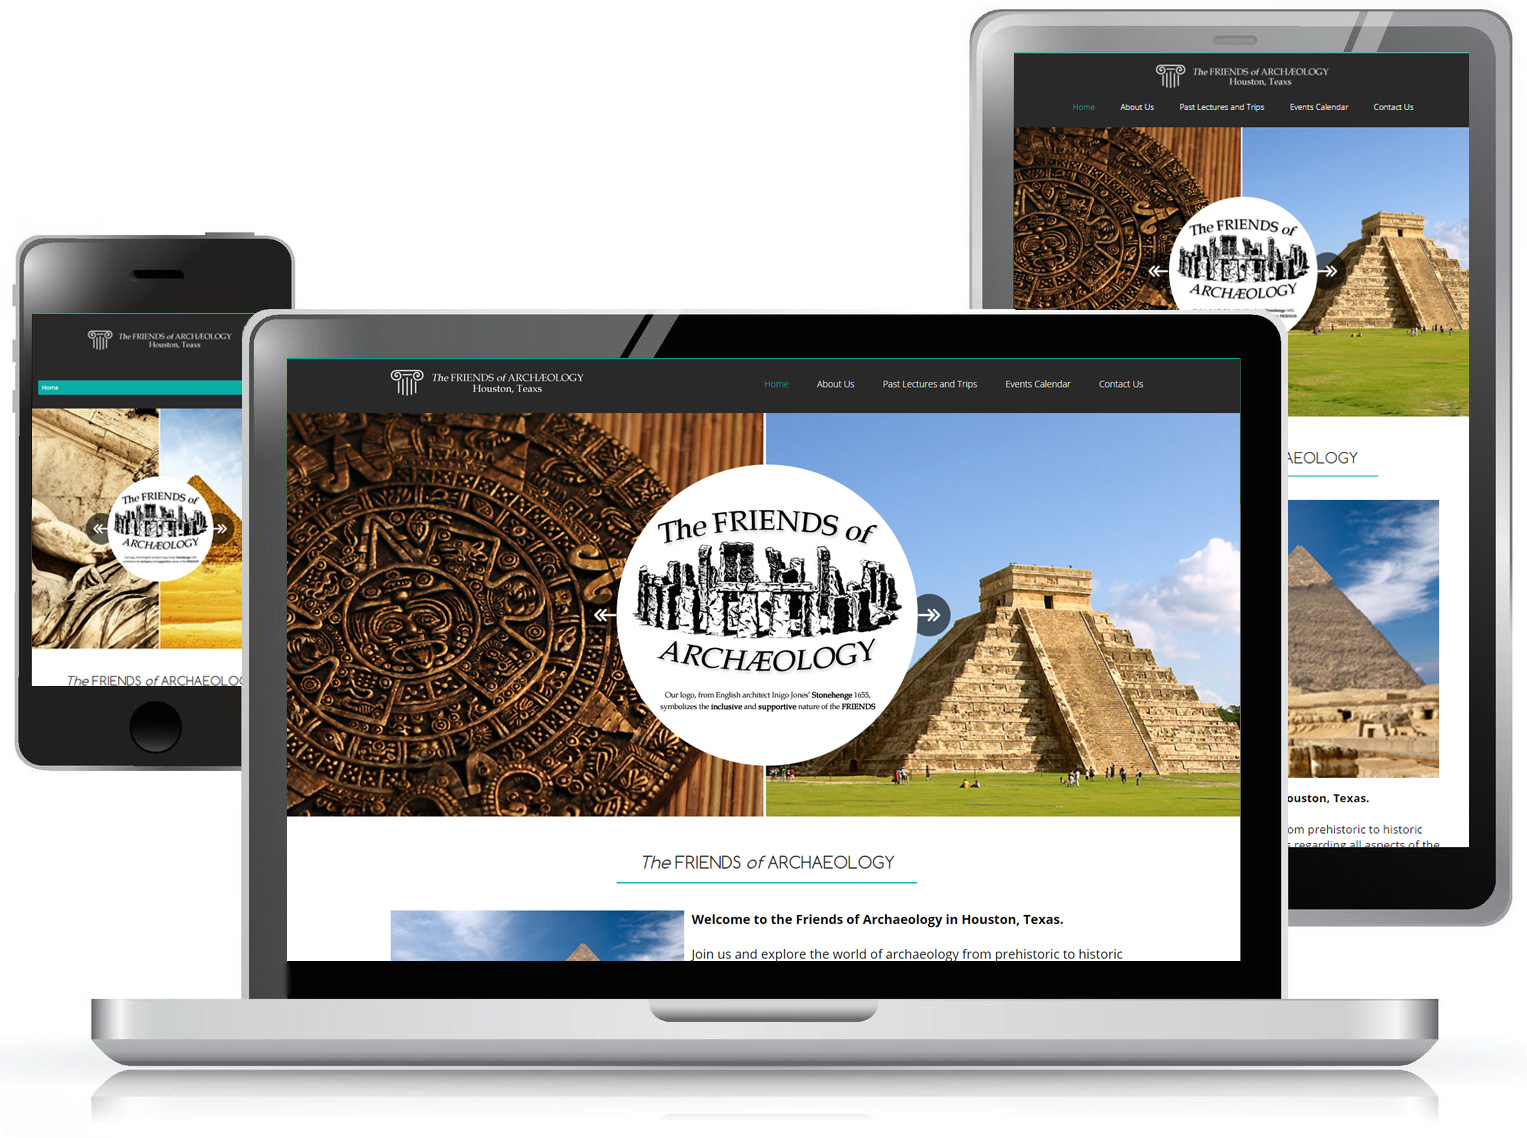 The Friends of Archaeology Web Design